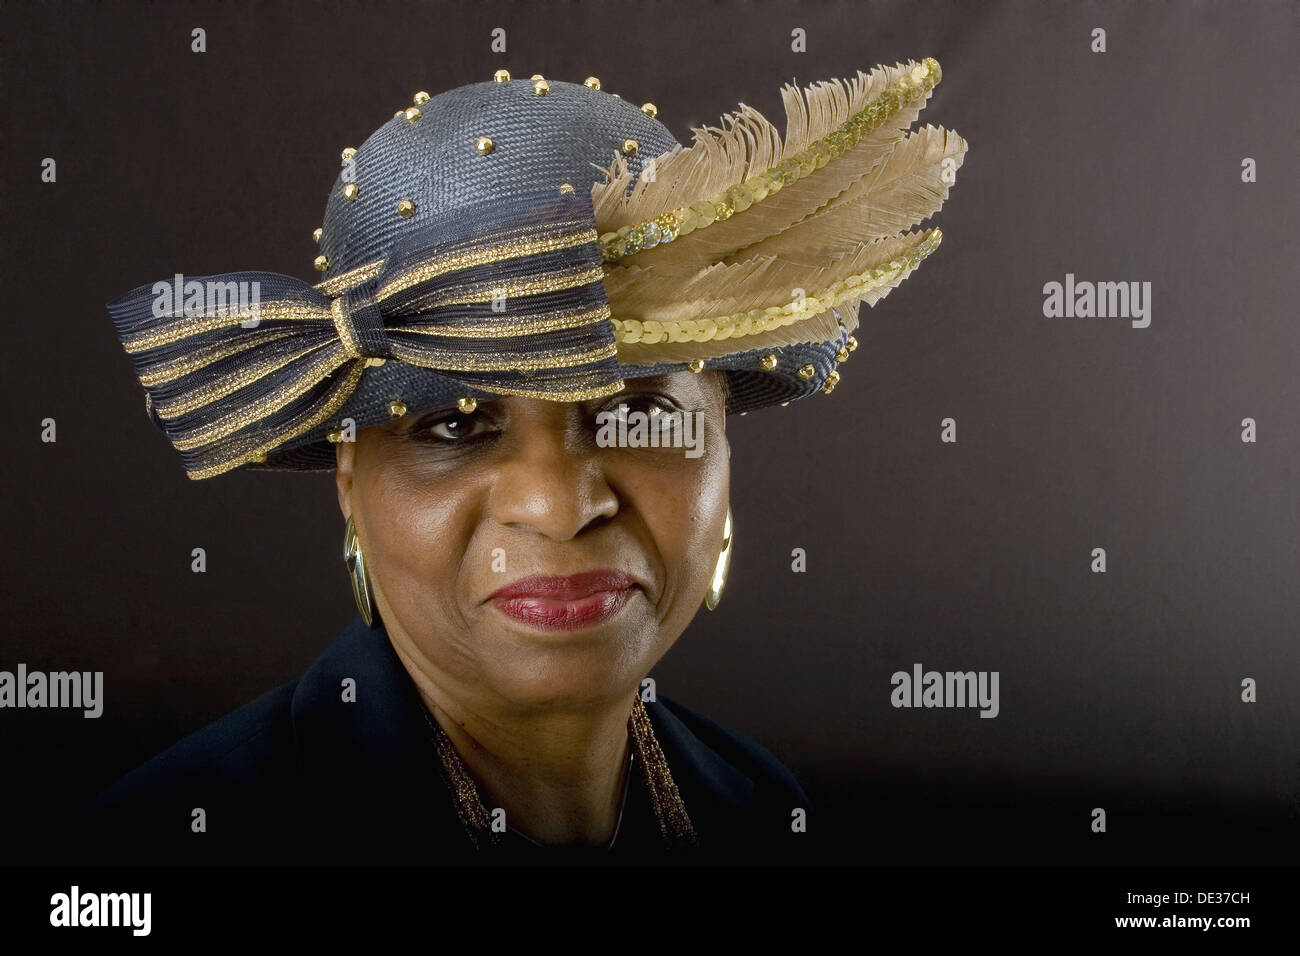 Minnie Anderson. Celebrating church hats and the women who wear them at Christ Pilgrim Rest - minnie-anderson-celebrating-church-hats-and-the-women-who-wear-them-DE37CH